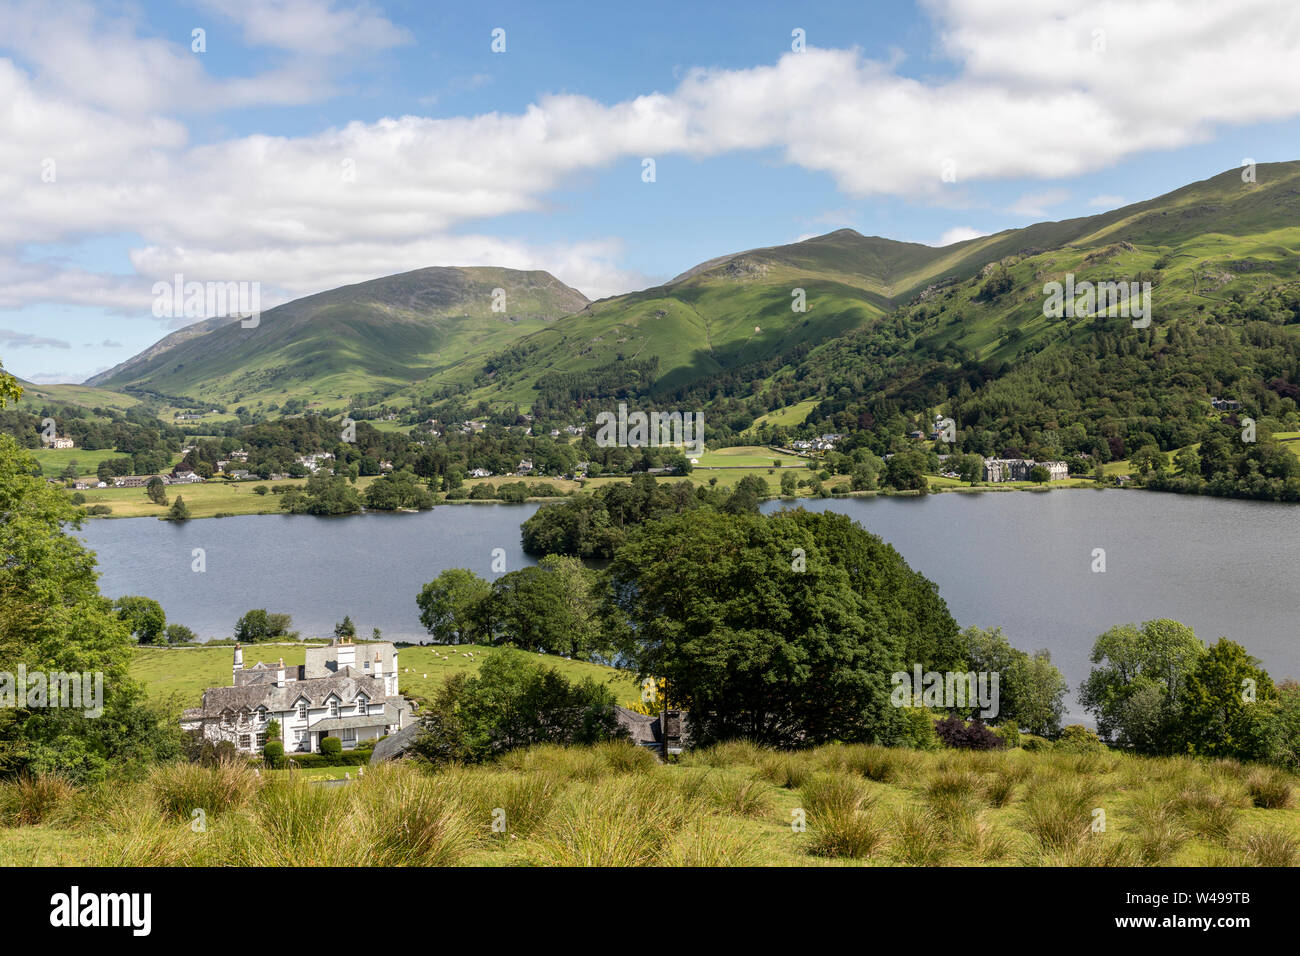 Grasmere from Red Bank looking towards Heron Pike and Rydal Fell Stock Photo